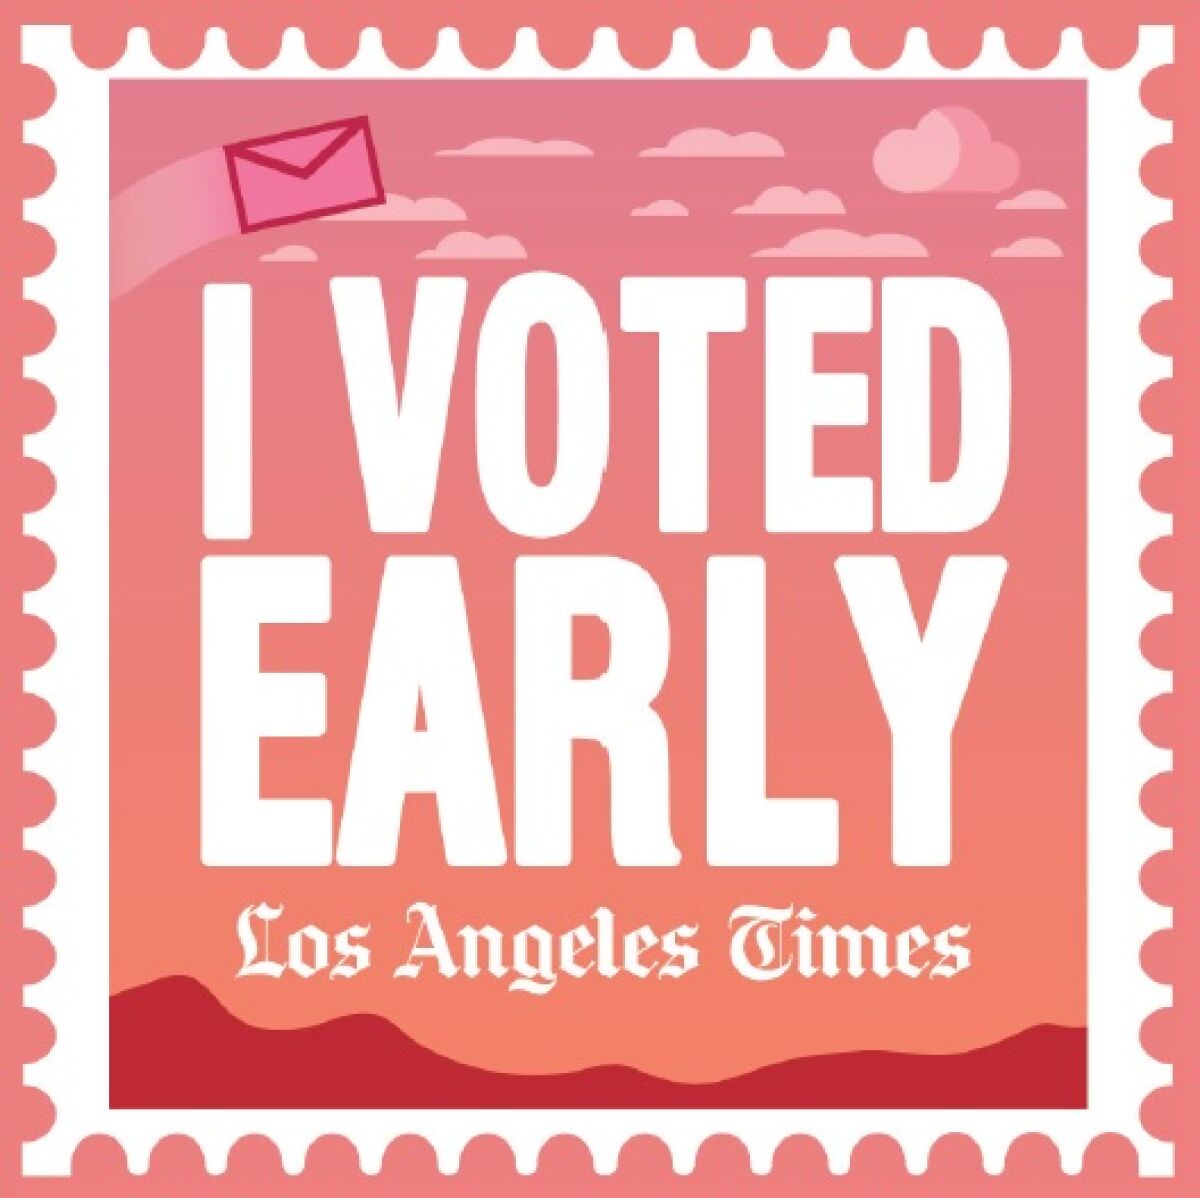 The “I Voted Early” sticker will appear on the cover of the Calendar section on Sunday, Oct. 11.